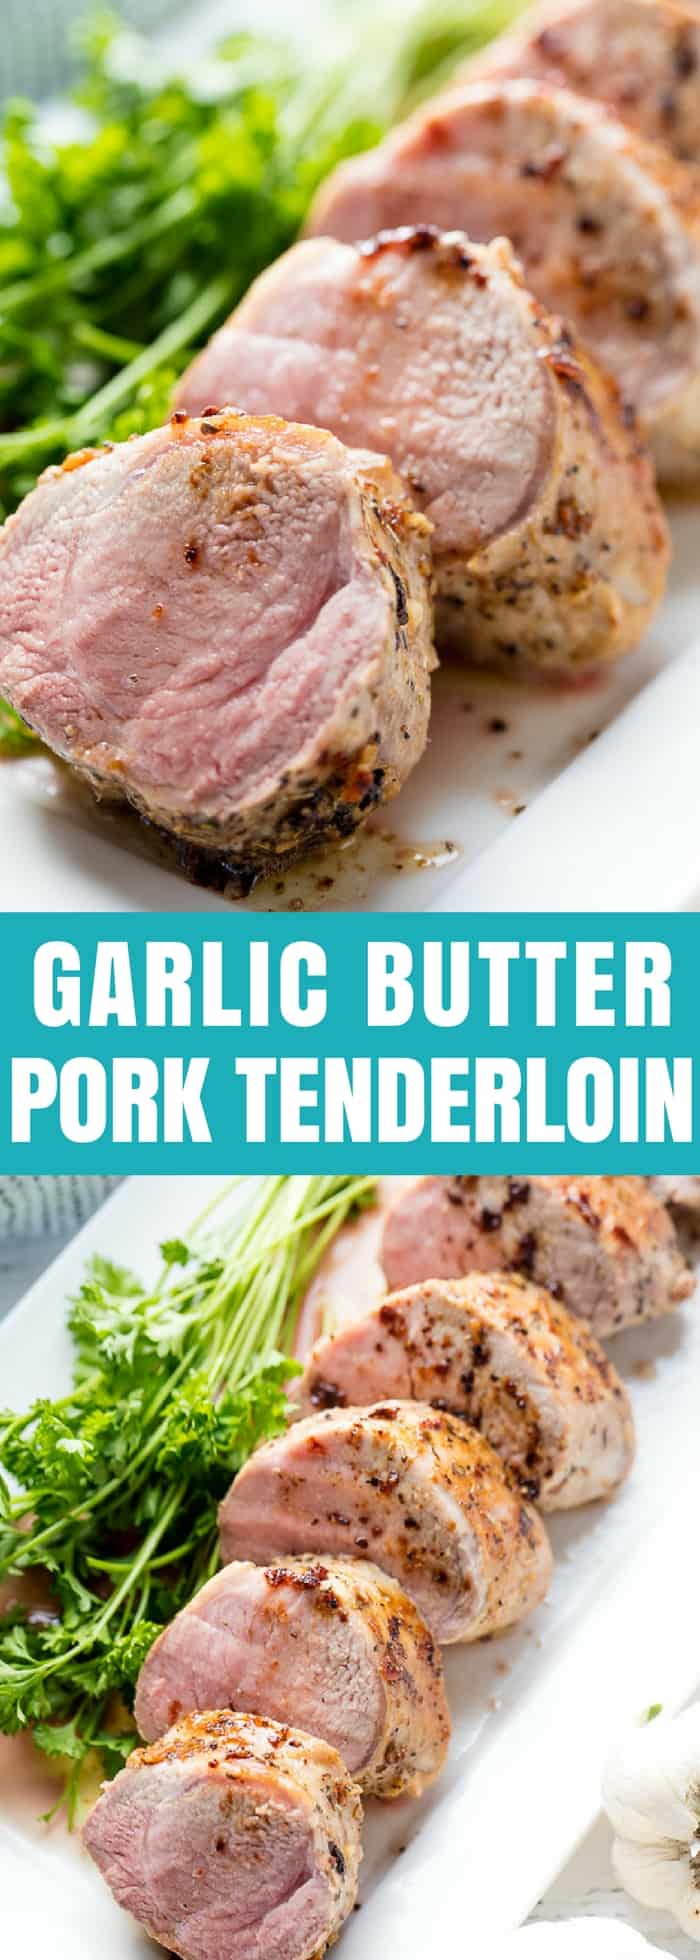 Pork tenderloin is seared and baked in a garlic butter sauce for a perfectly tender baked pork tenderloin dinner that will have you wanting to lick the plate!